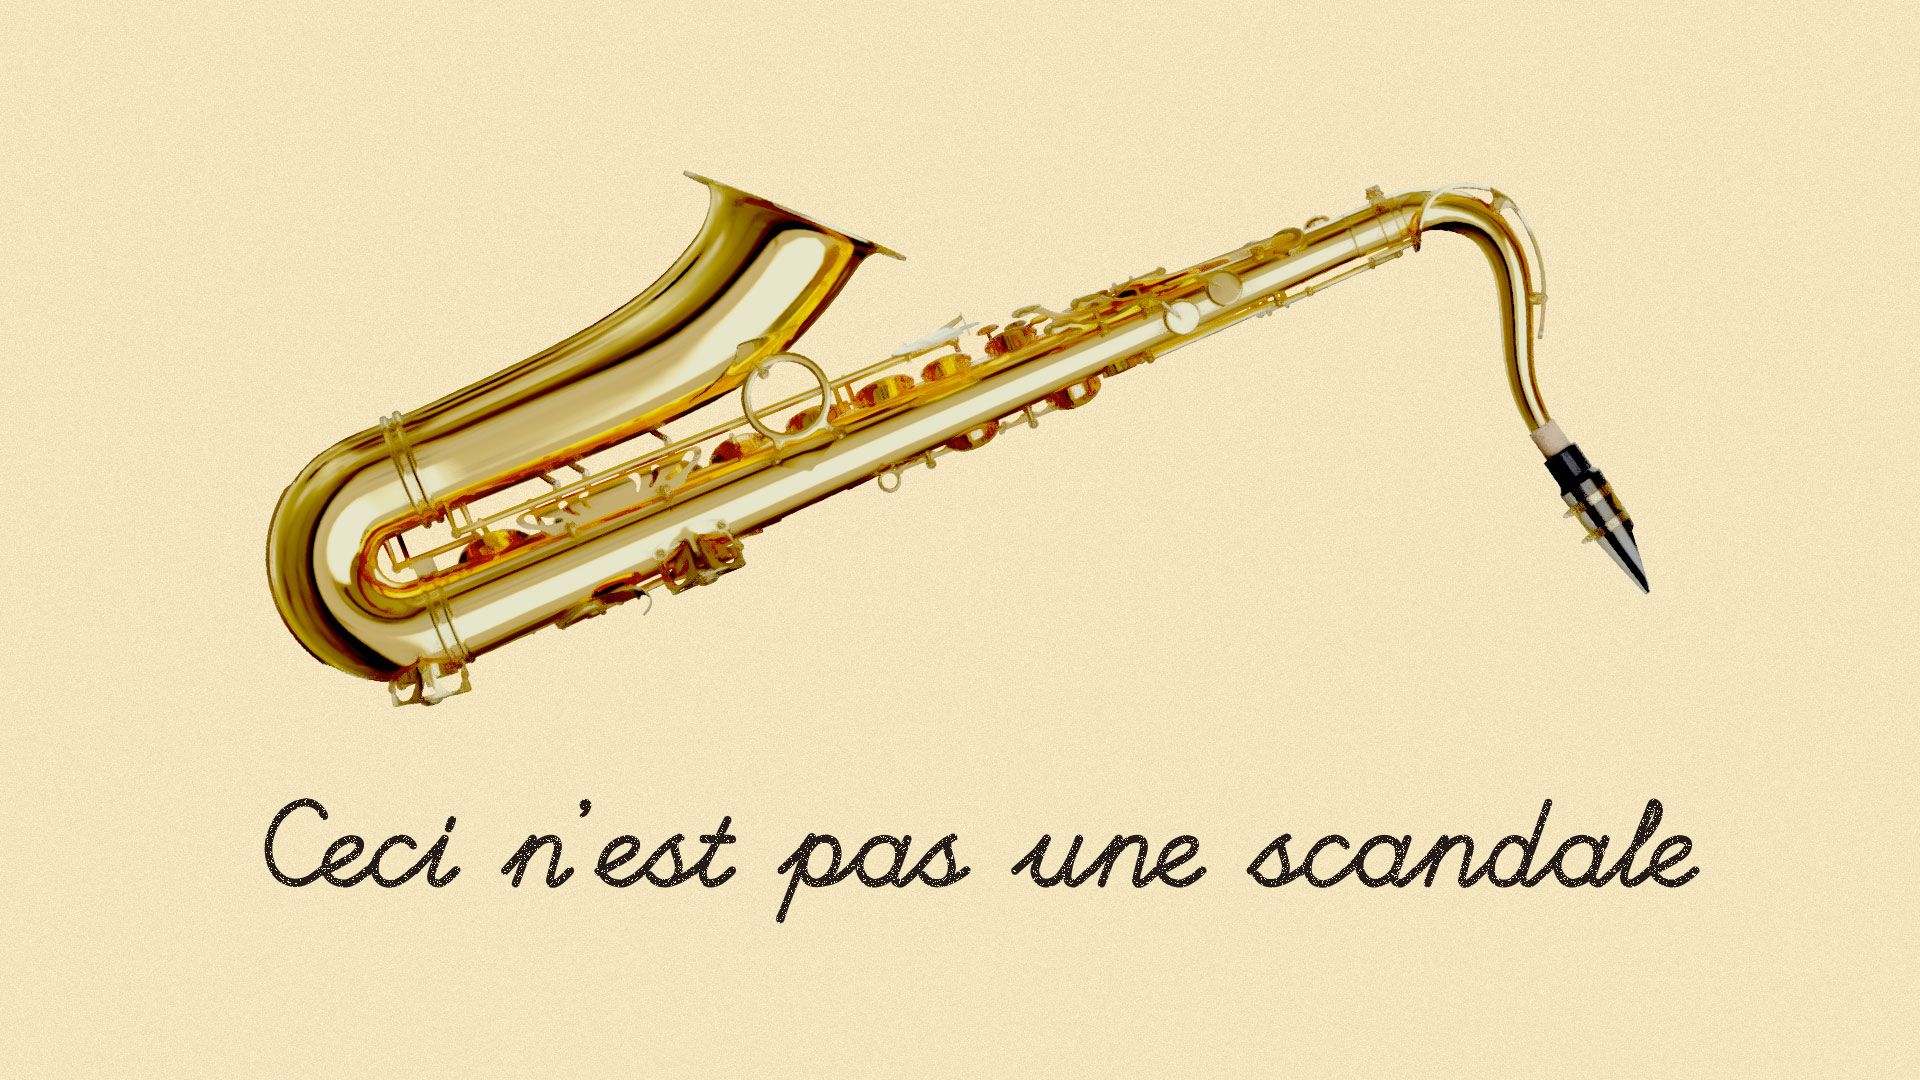 A spoof on a Rene Magritte painting showing a saxophone and reading 'Ceci n'est pas une scandale'